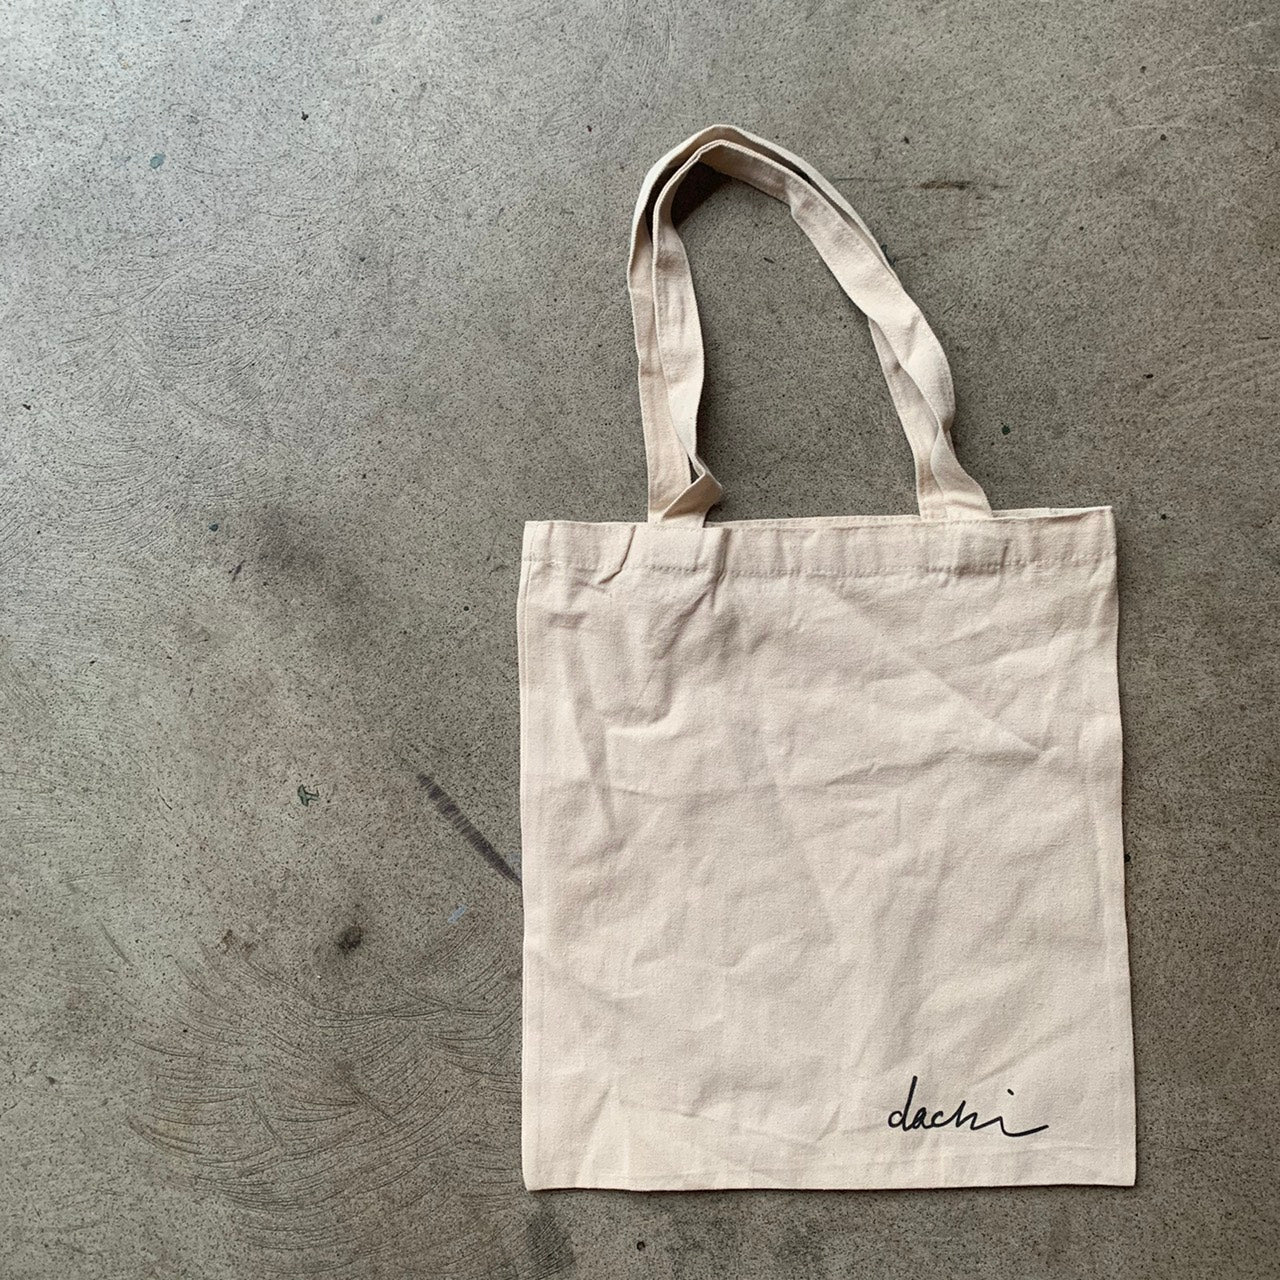 Dachi 'Store Front' Tote Bag